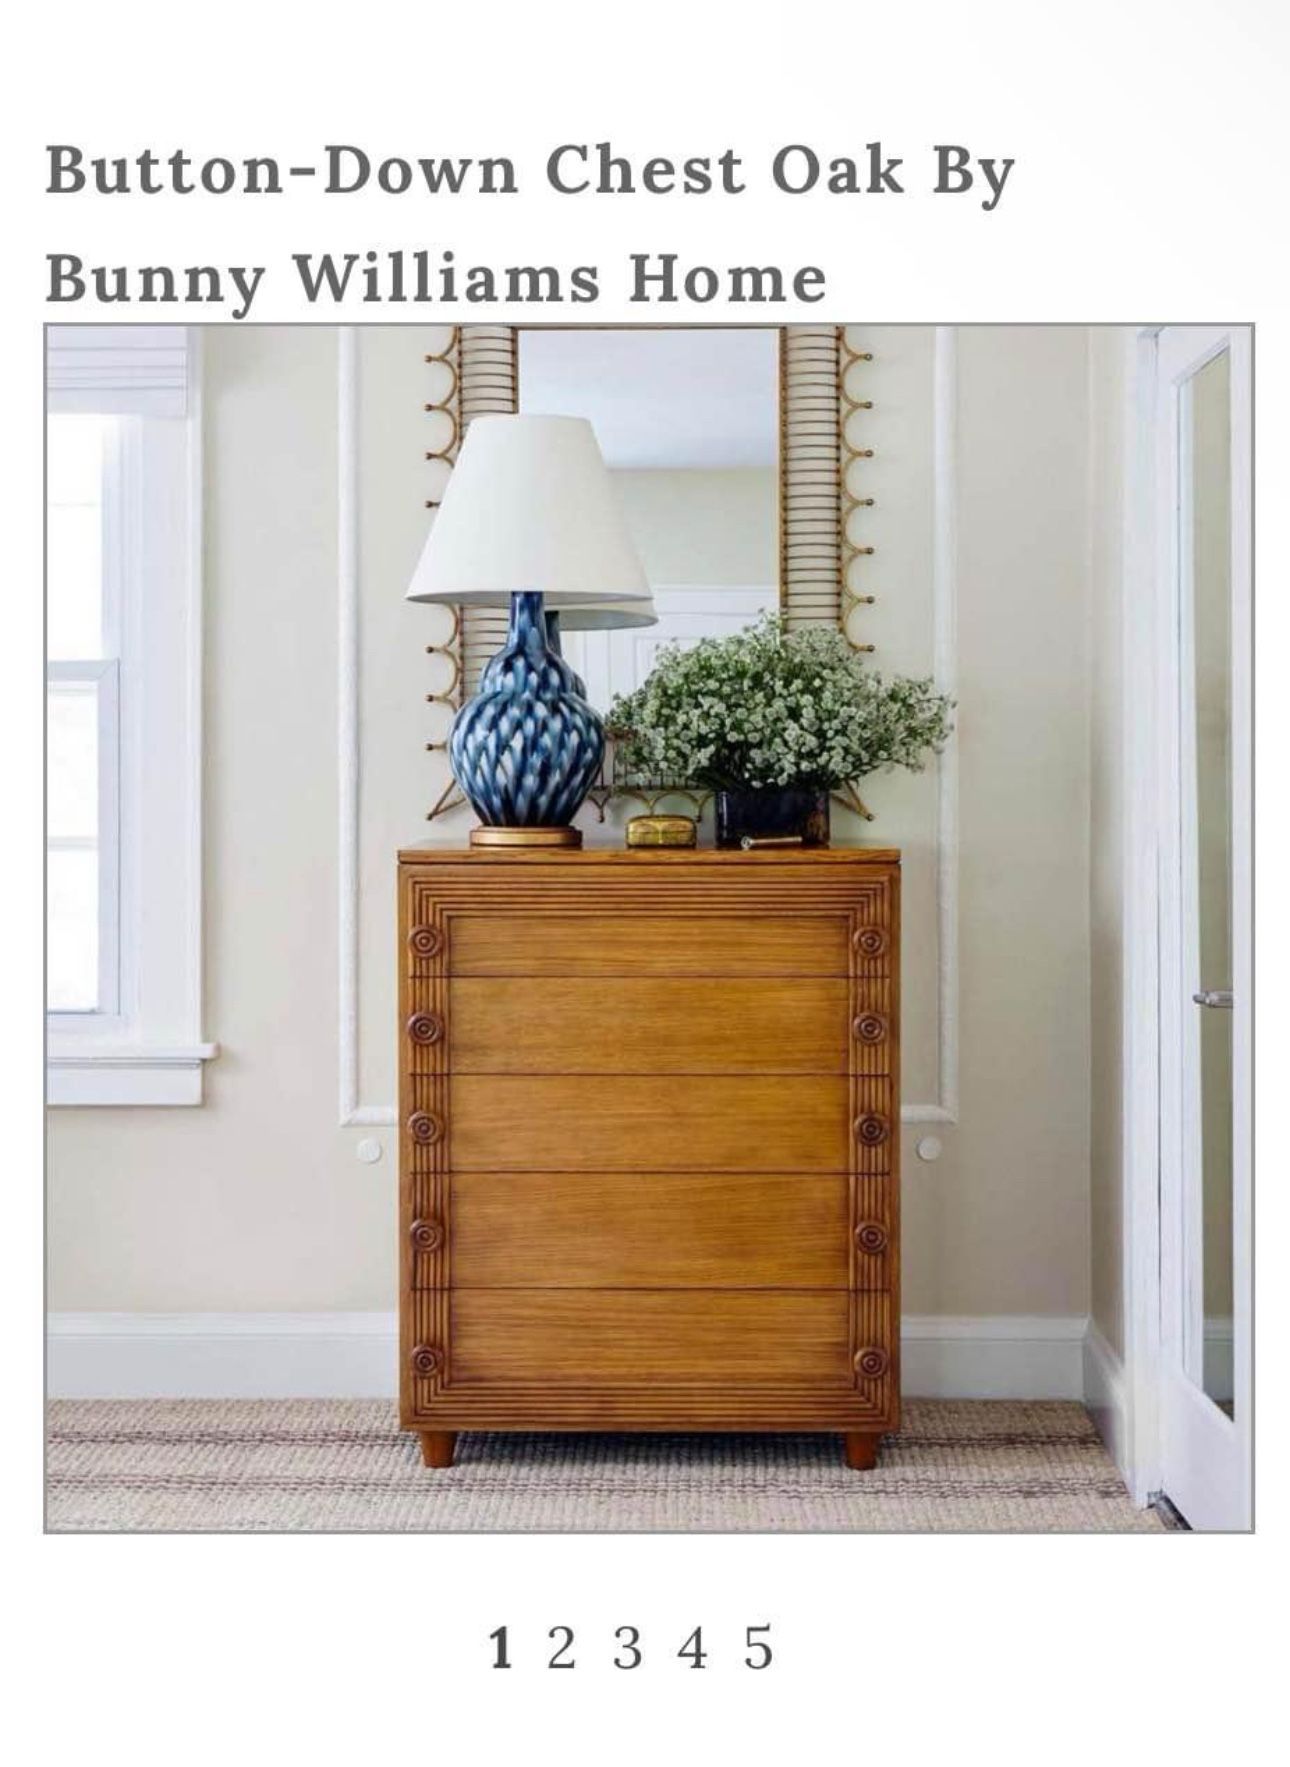 Button-Down Chest Oak by Bunny Williams Home